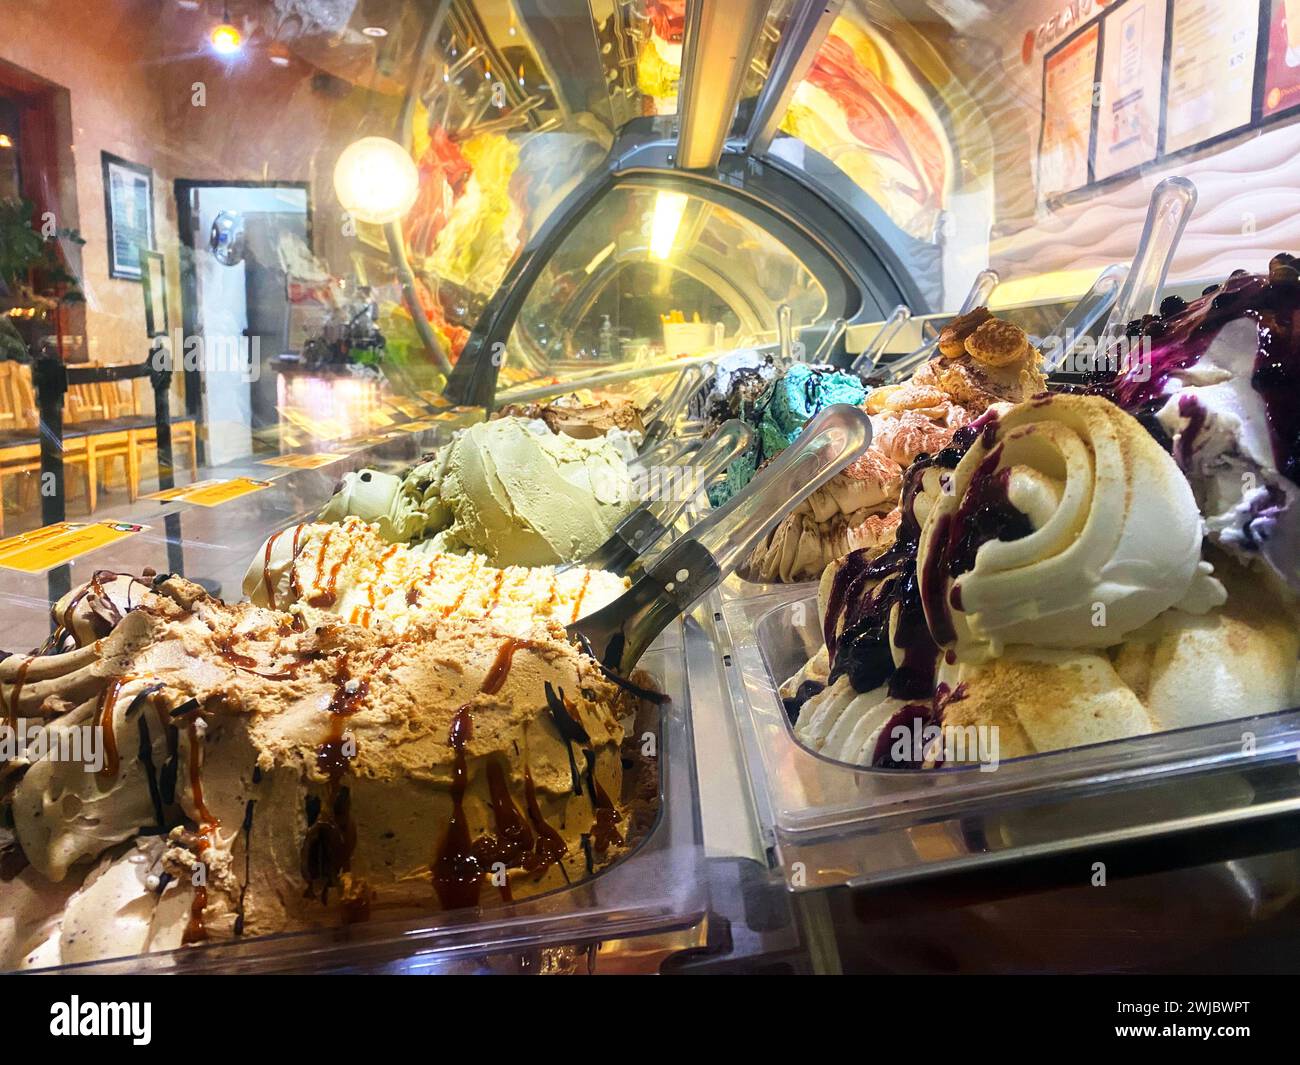 Tubs of gelato at a gelateria waiting to be scooped for customers, interior view of an ice cream cooler or freezer with colourful artisanal flavors Stock Photo